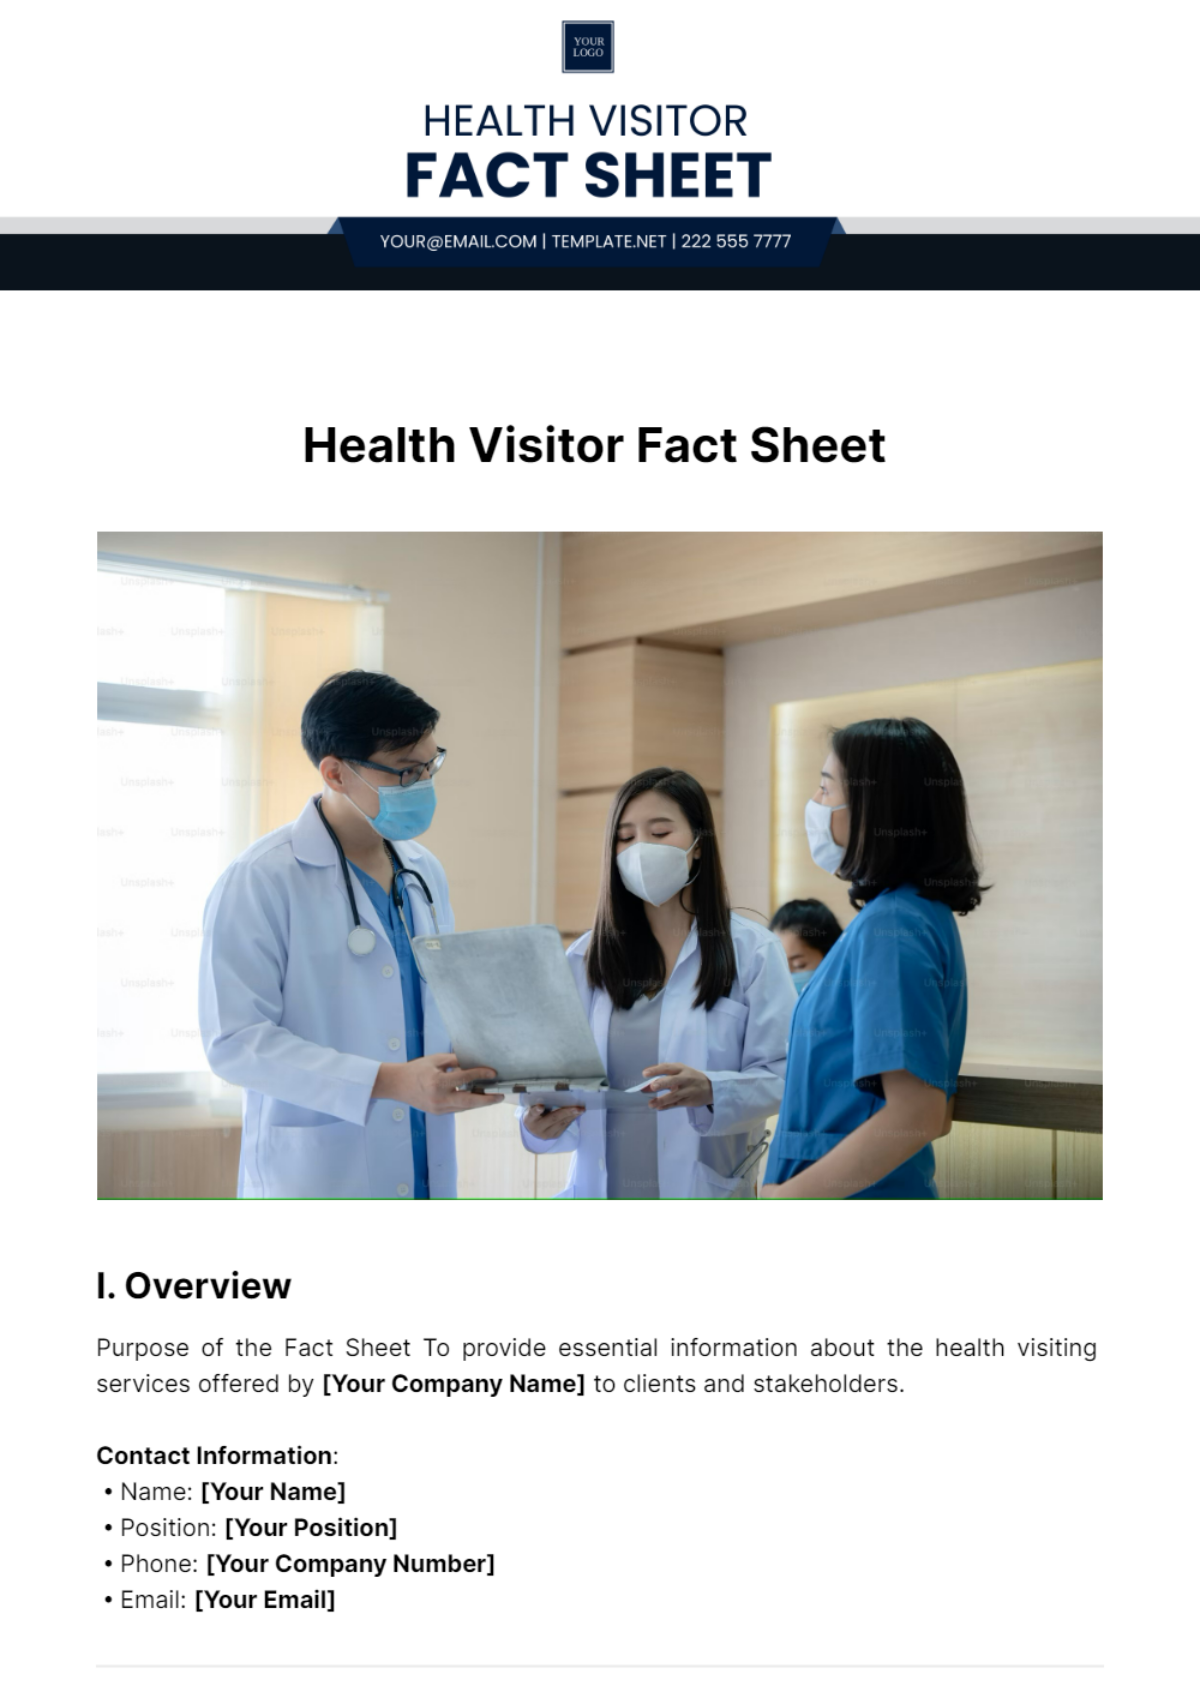 Health Visitor Fact Sheet Template